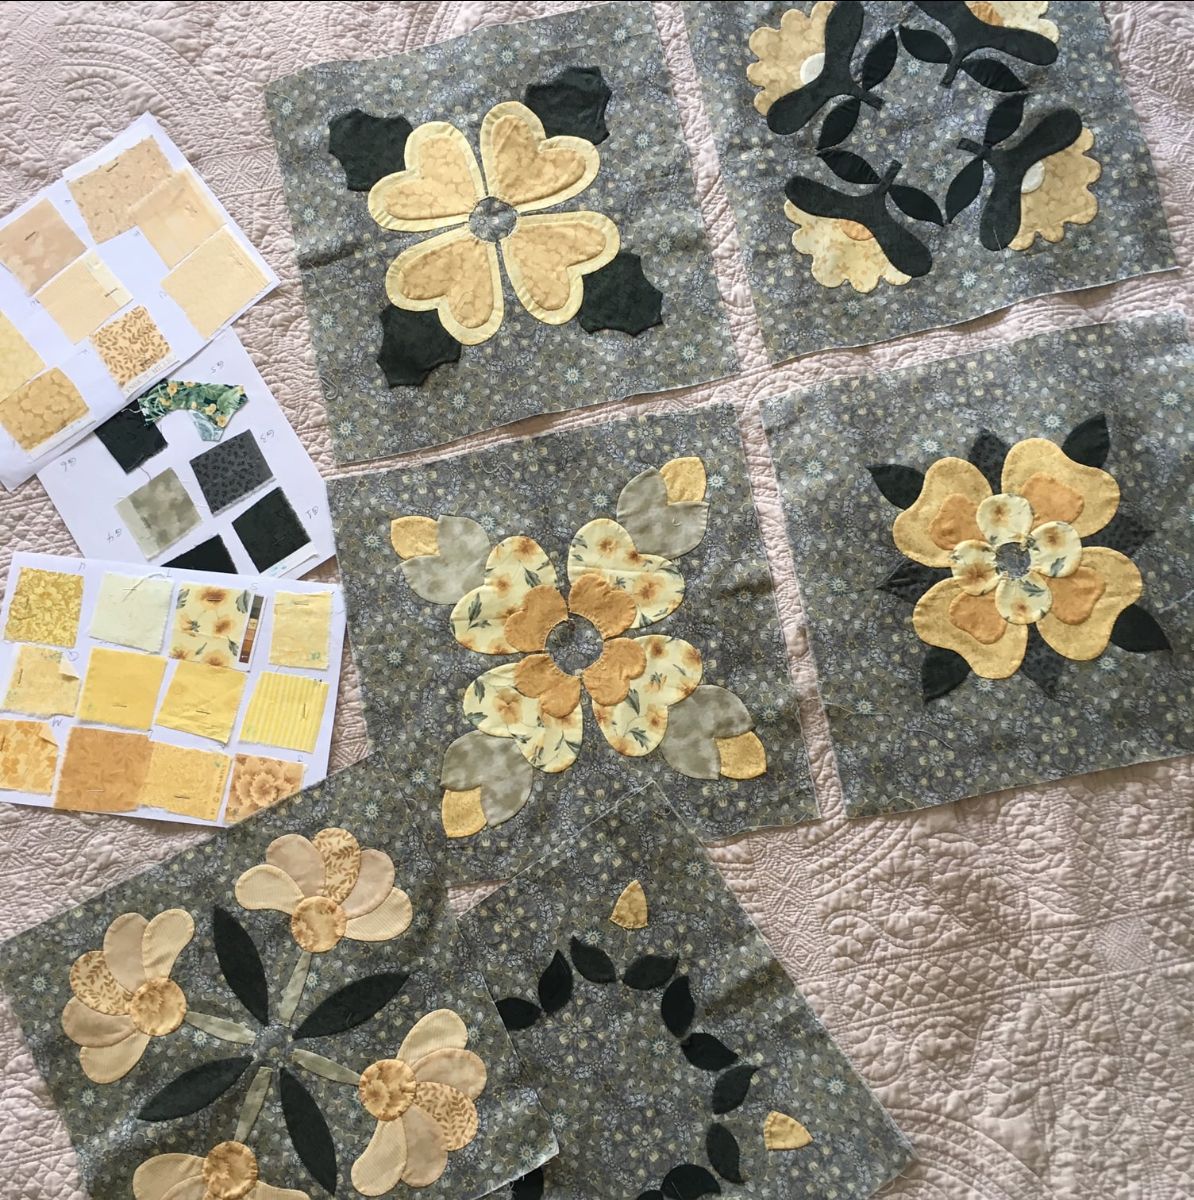 The actual yellow rose quilt - work in progress.